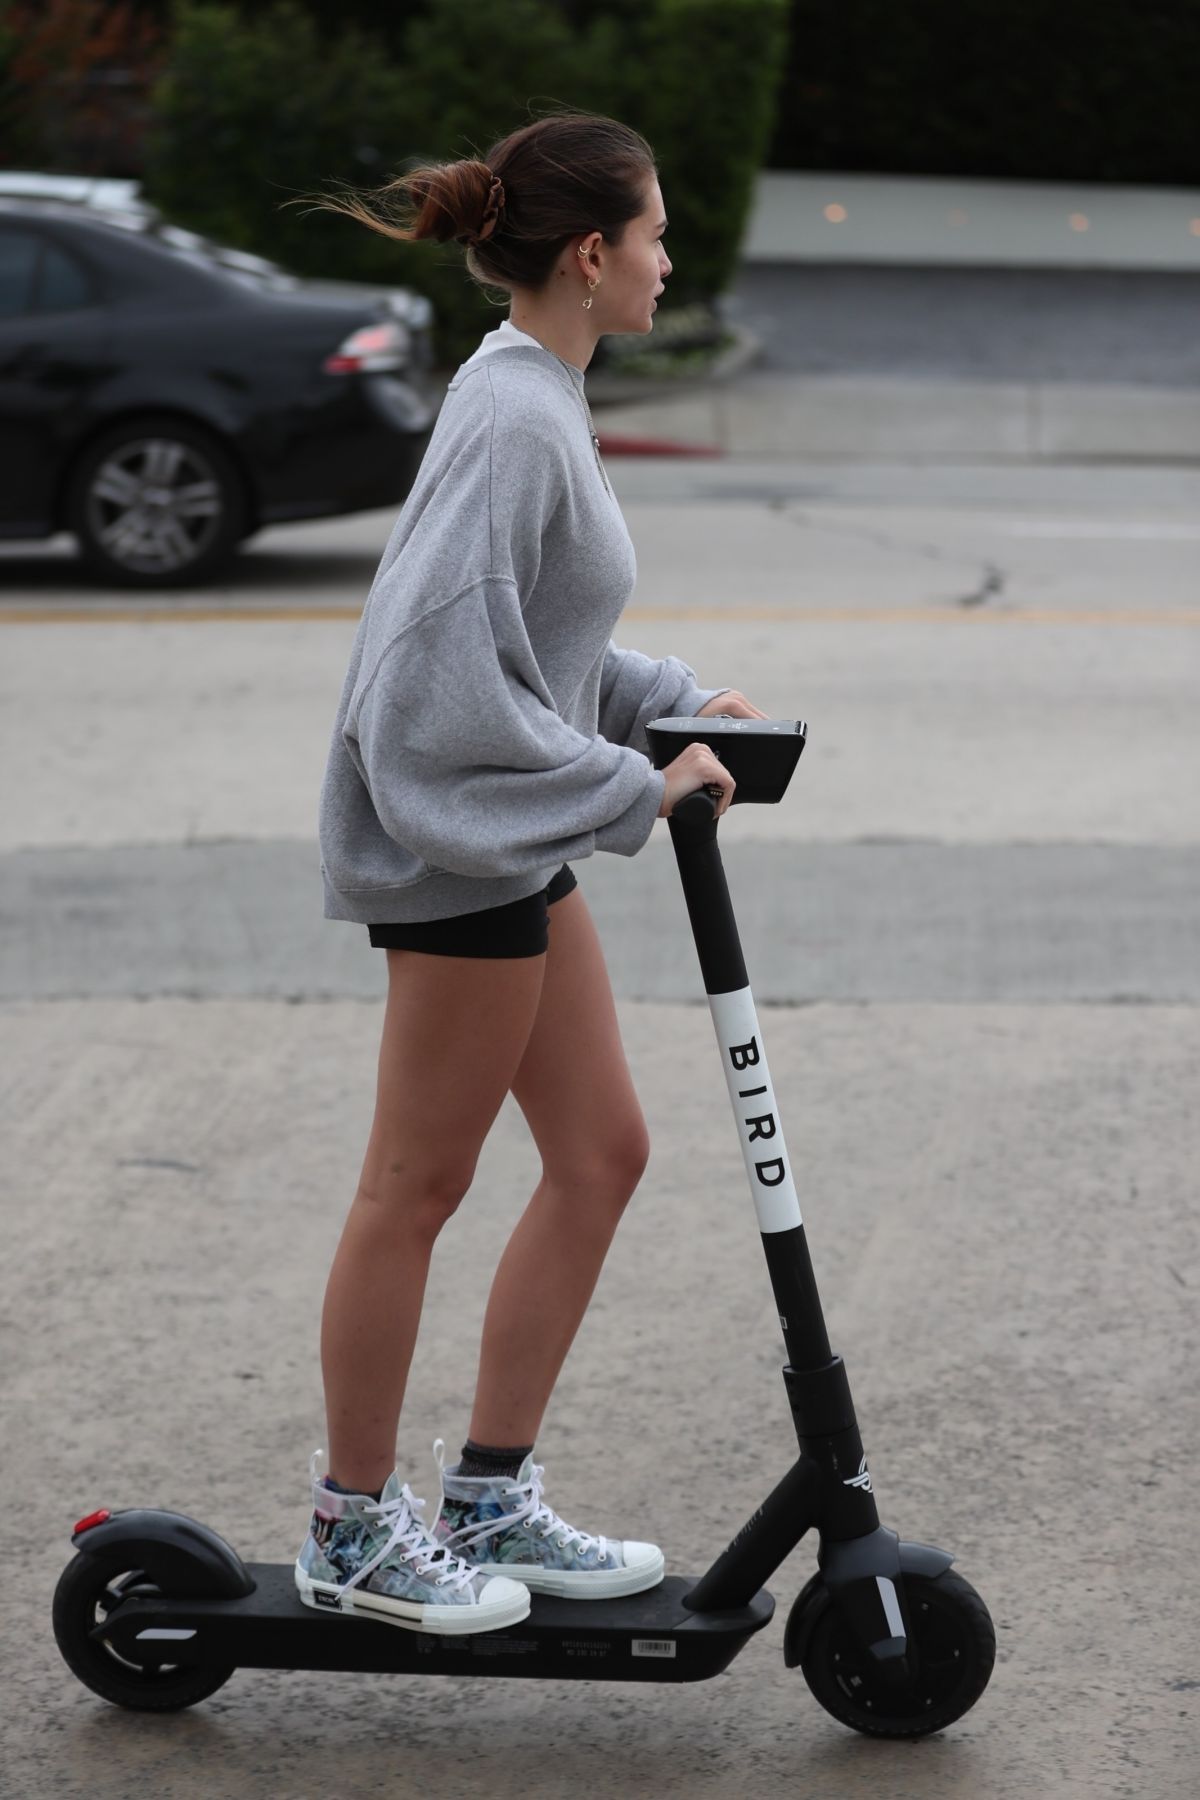 thylane-blondeau-riding-a-scooter-out-in-west-hollywood-06-21-2019-0.jpg